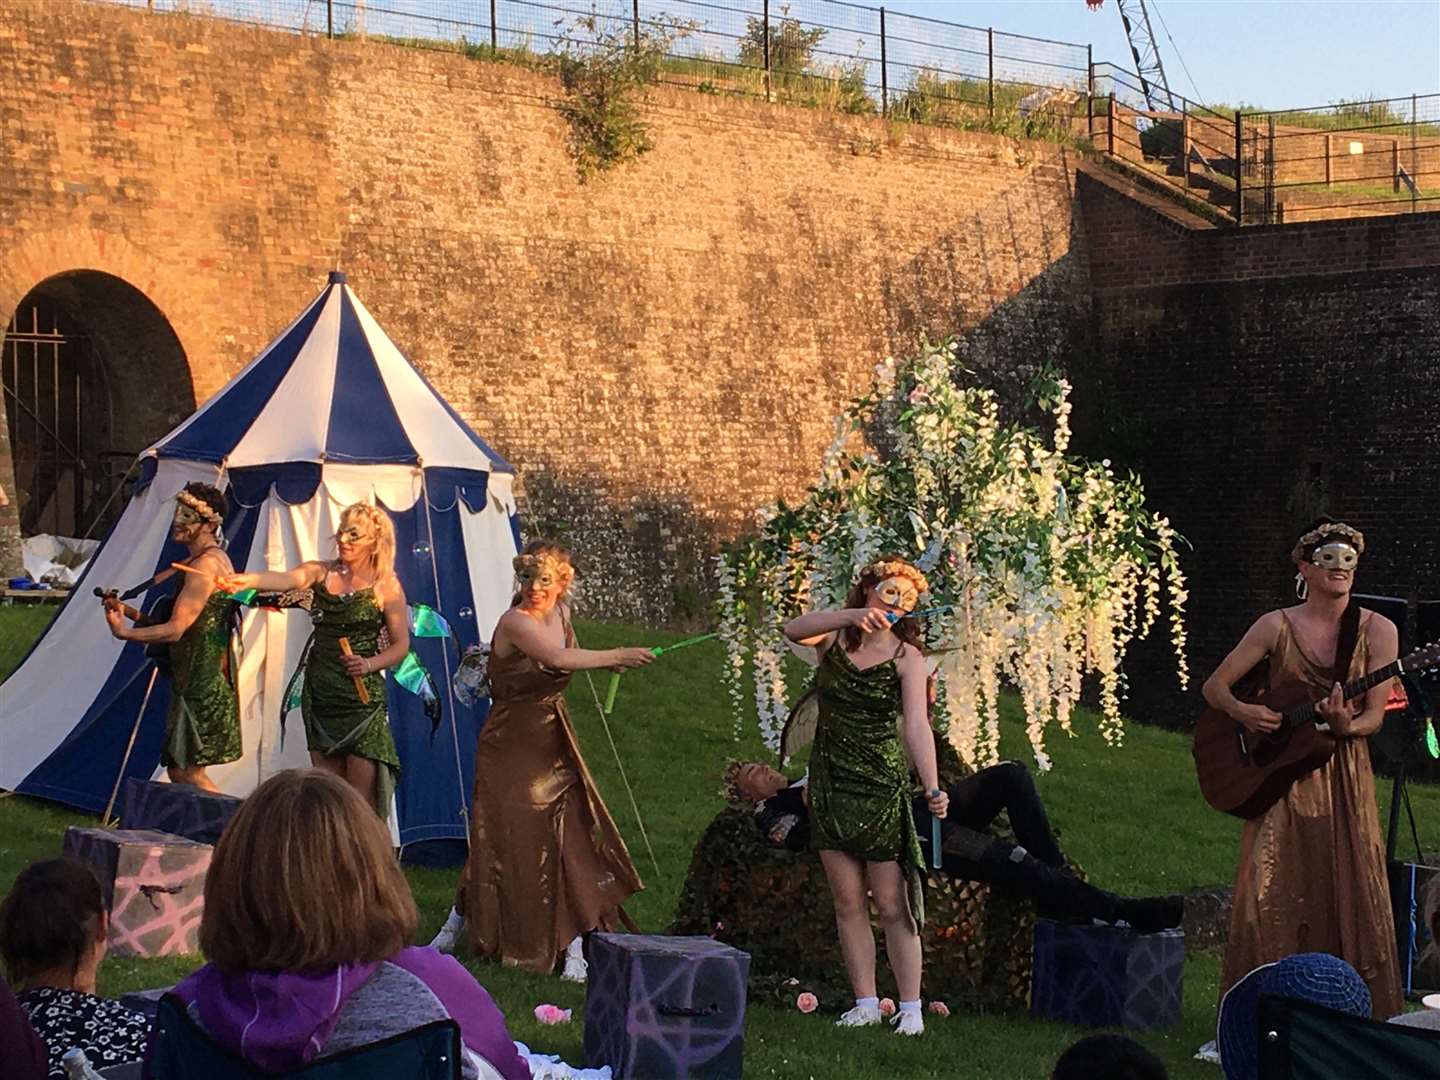 Changeling Theatre performed A Midsummer Night's Dream in 2021; this year, they will perform Othello and The Importance of Being Earnest. Picture: Angela Cole